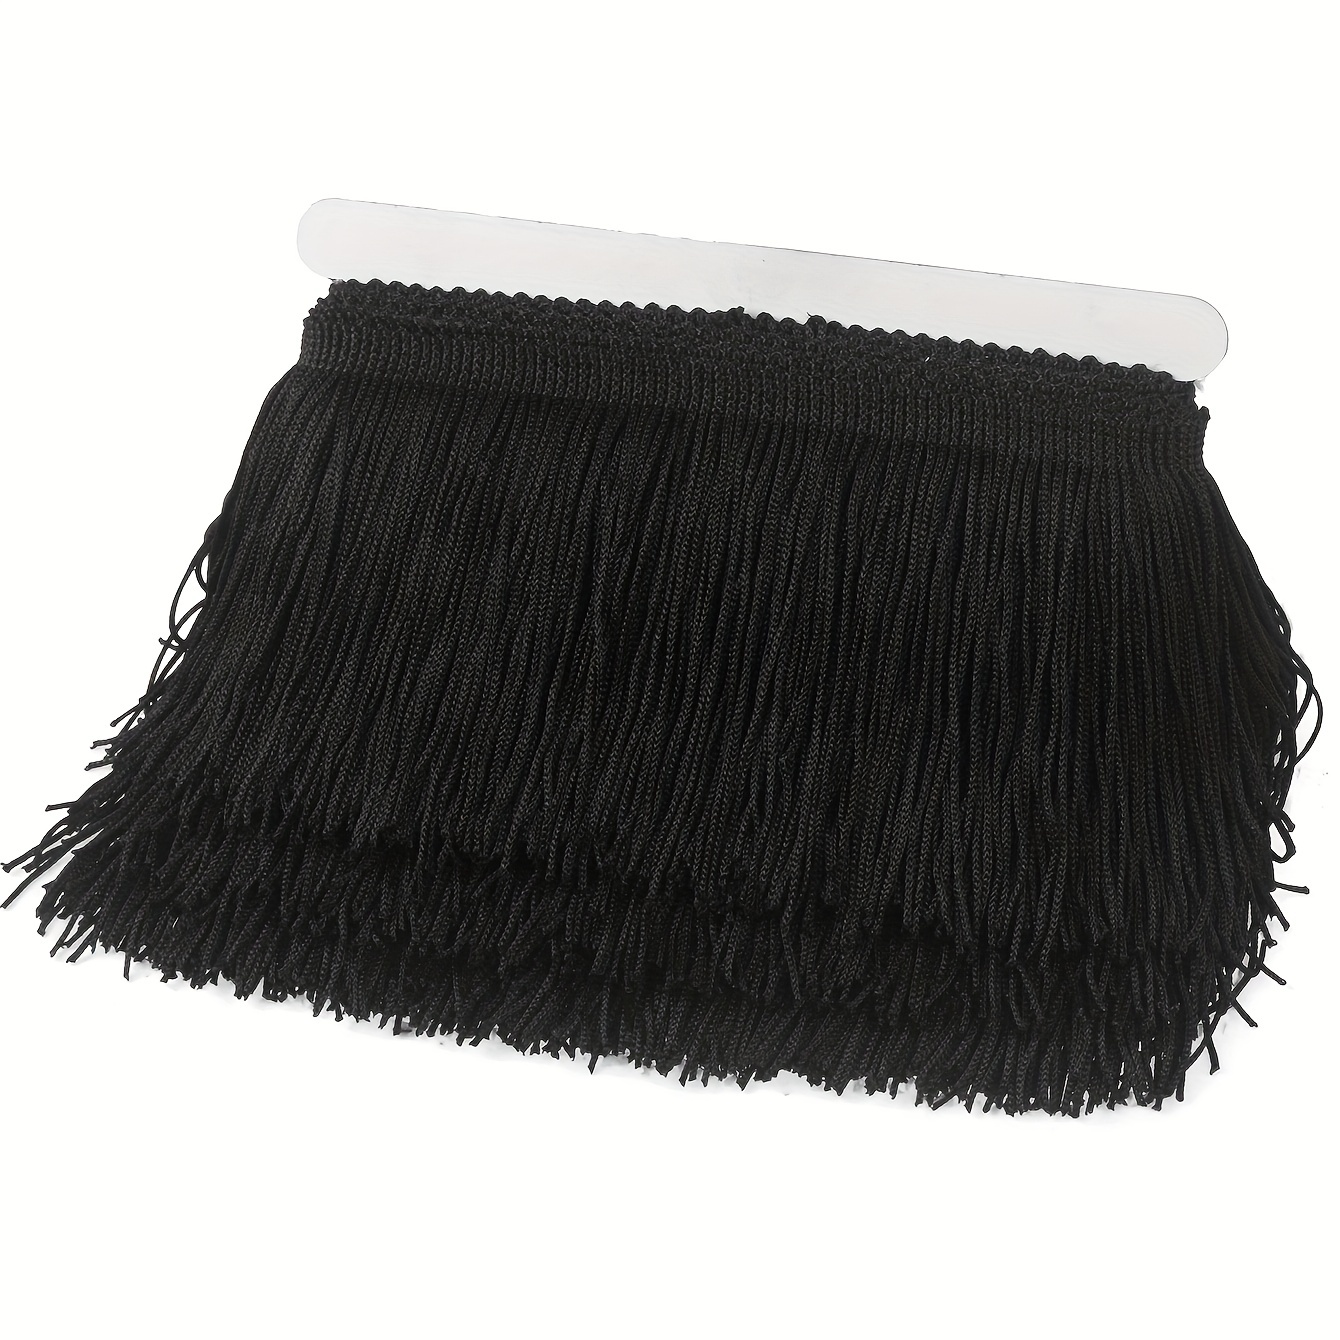 AWAYTR 10 Yards Sewing Fringe Trim - 4in Wide Tassel for DIY Craft Clothing  and Dress Decoration (Black, 4 Inches Wide)